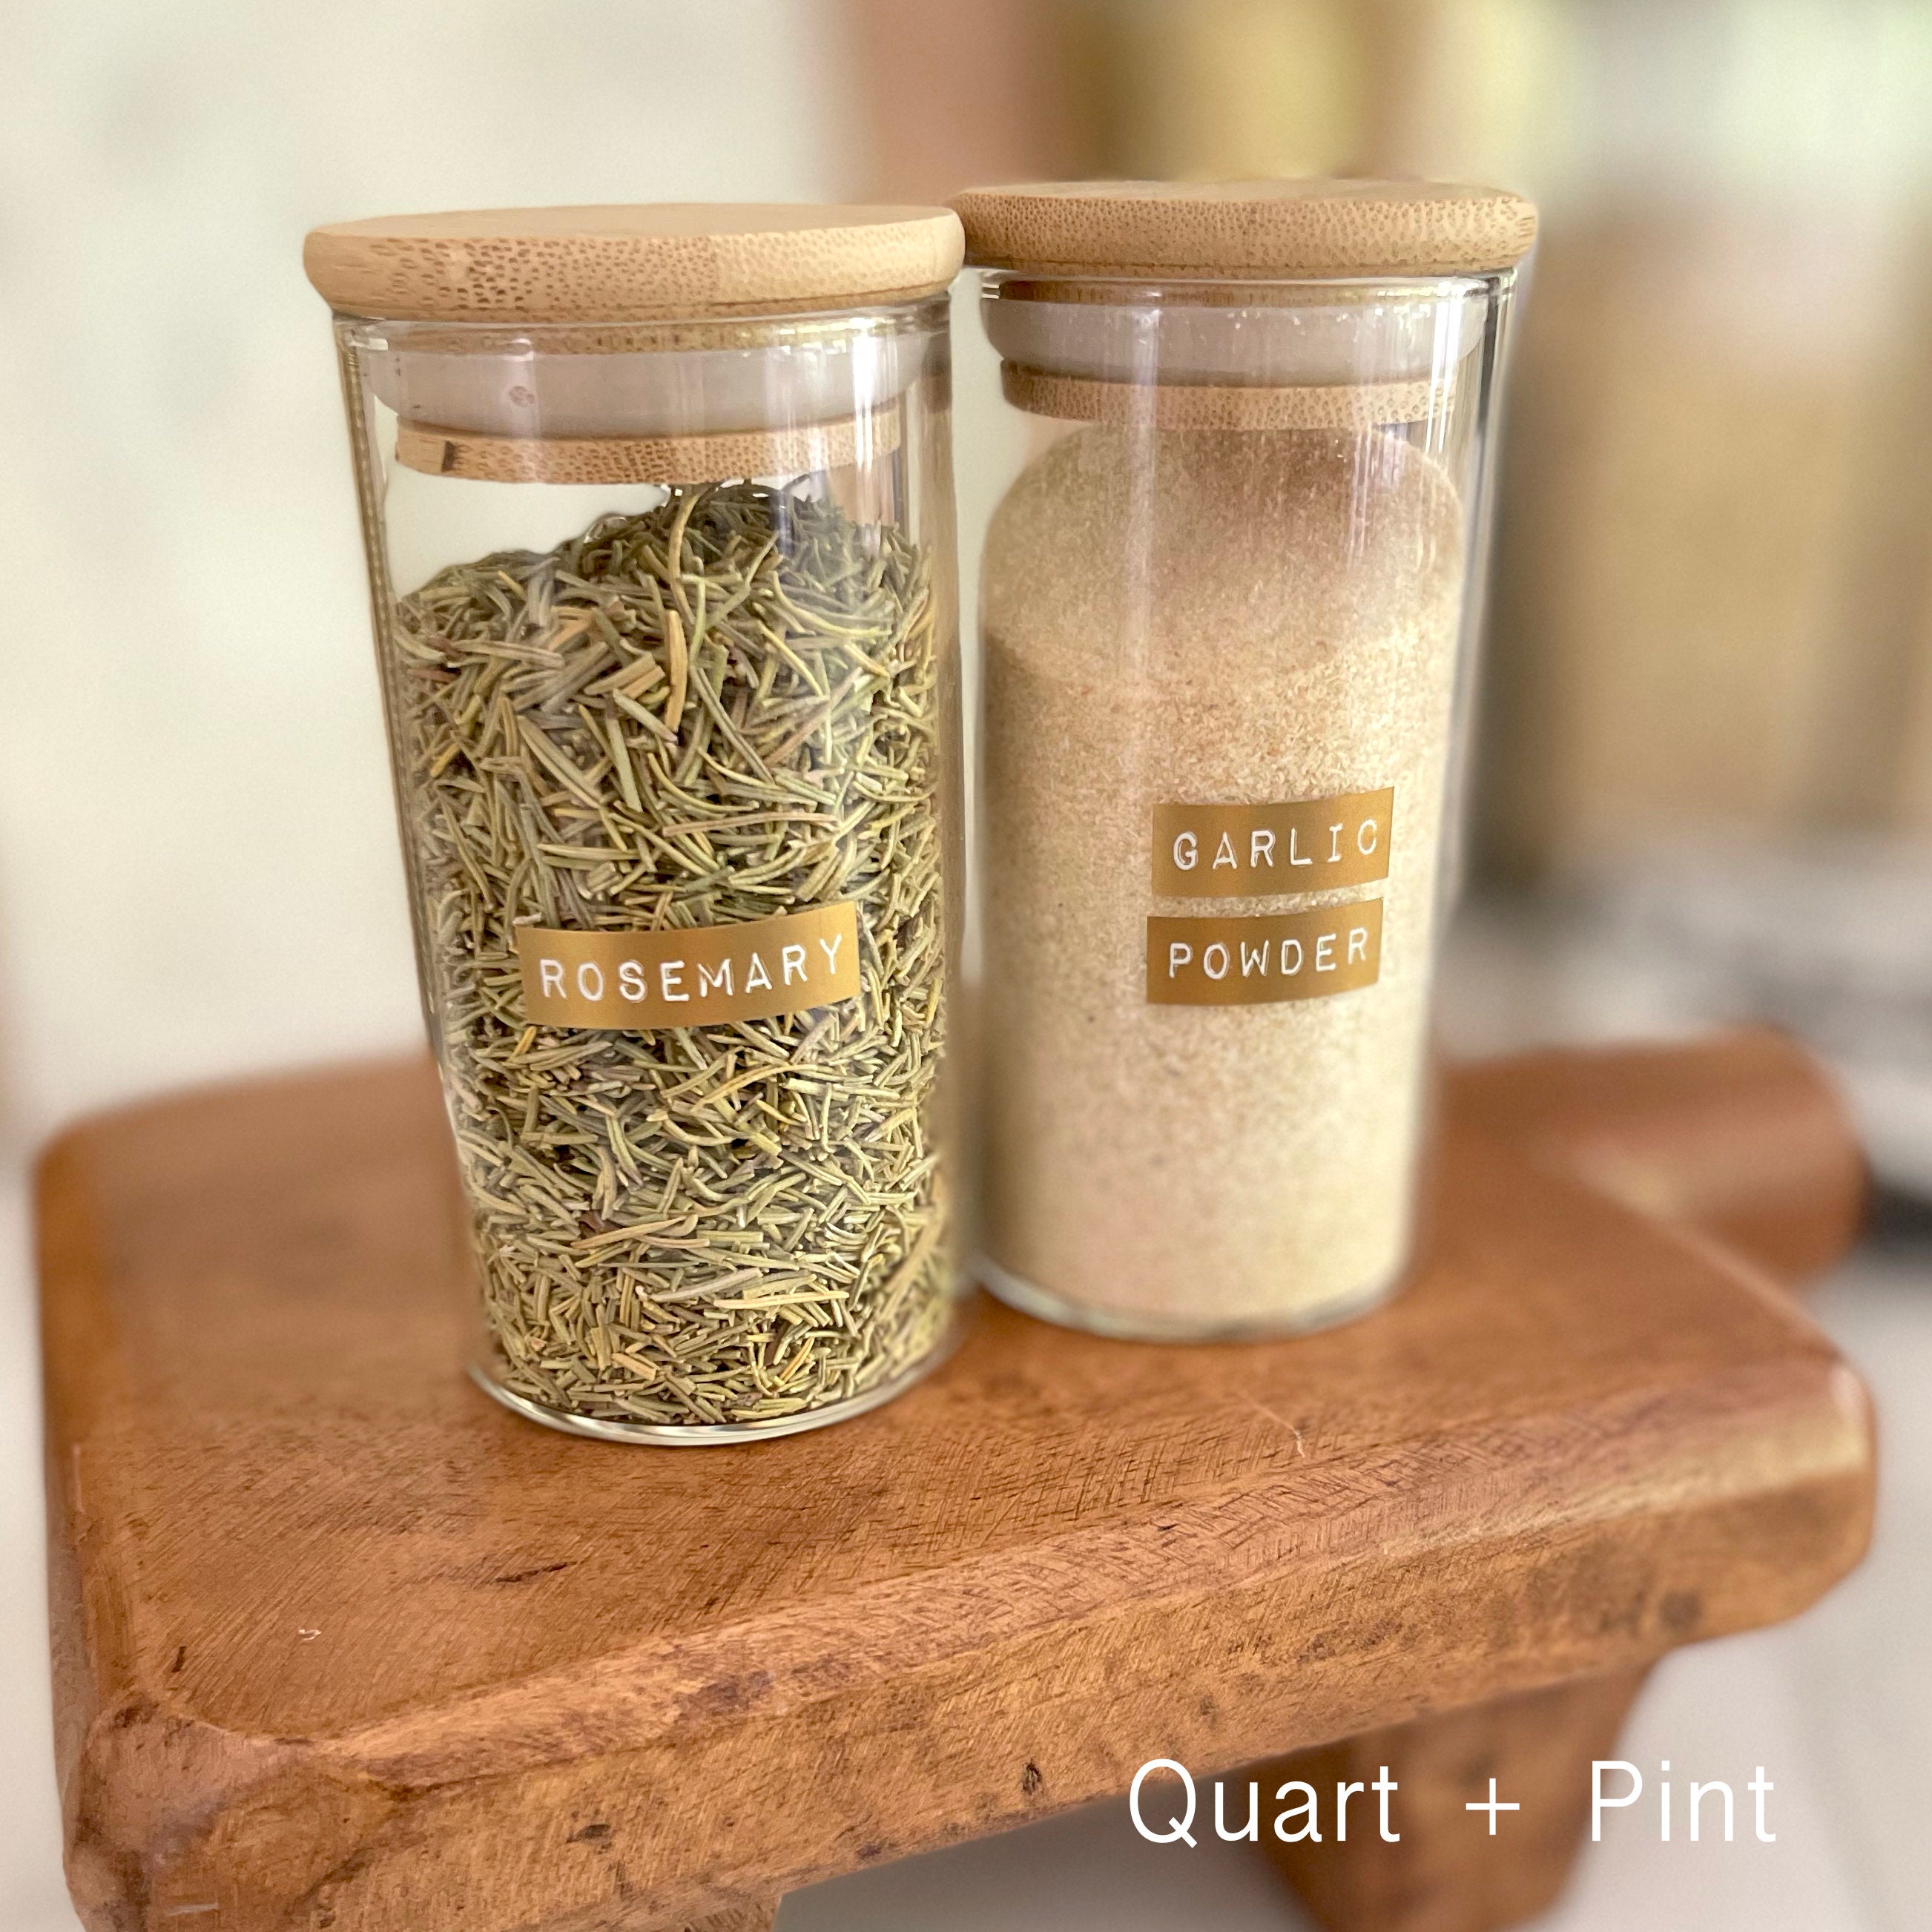 160 Gold Spice Jar Labels: Preprinted Minimalist Gold Foil Vinyl Stickers  White Text. Organization for Kitchen Spice Jars and Spice Racks 